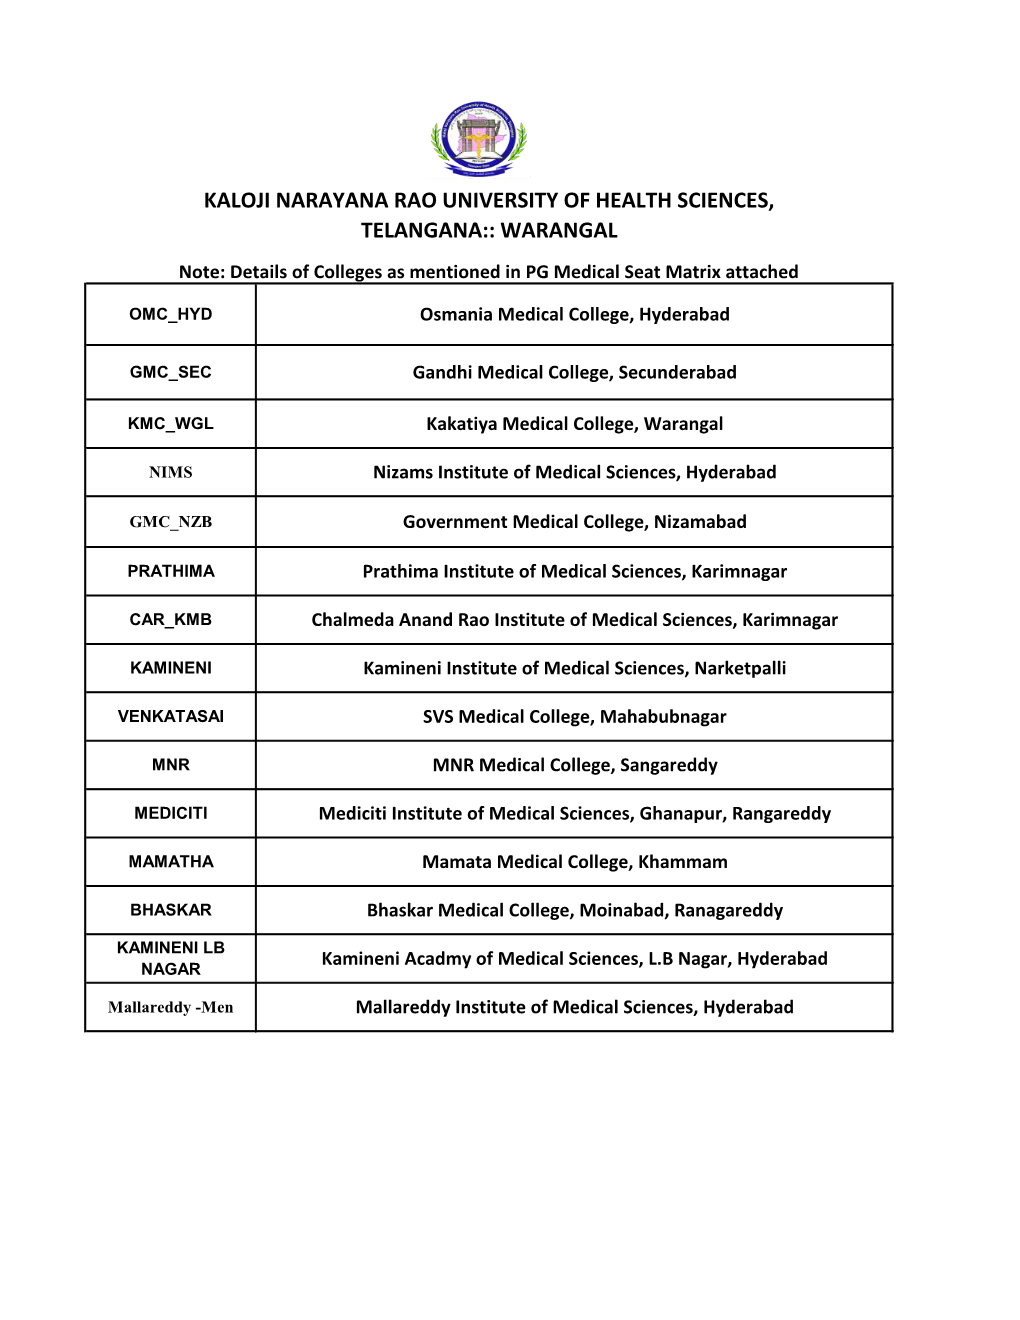 KALOJI NARAYANA RAO UNIVERSITY of HEALTH SCIENCES, TELANGANA:: WARANGAL Note: Details of Colleges As Mentioned in PG Medical Seat Matrix Attached